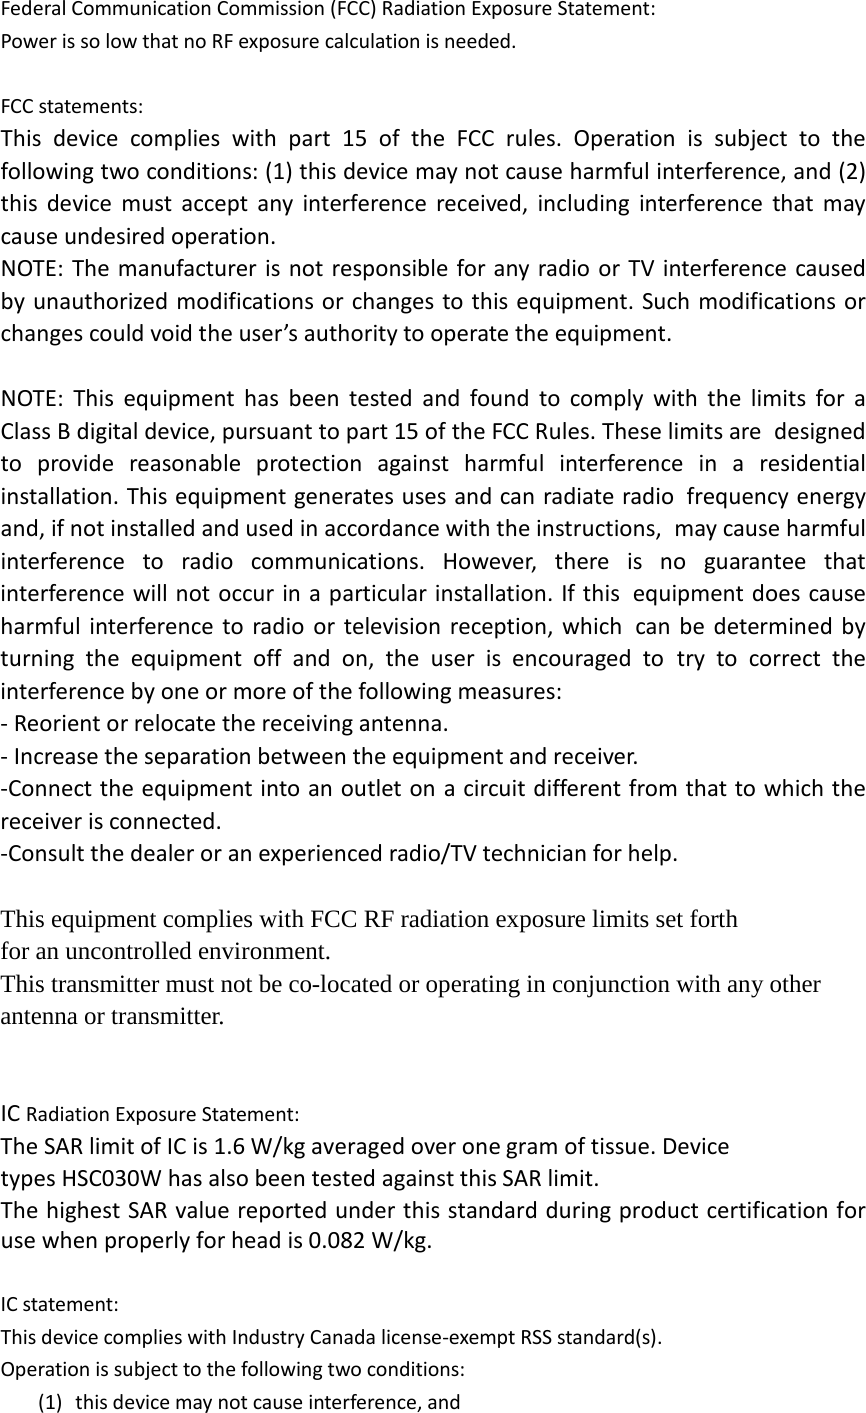 Federal Communication Commission (FCC) Radiation Exposure Statement: Power is so low that no RF exposure calculation is needed.  FCC statements: This device complies with part 15 of the FCC rules. Operation is subject to the following two conditions: (1) this device may not cause harmful interference, and (2) this device must accept any interference received, including interference that may cause undesired operation.  NOTE: The manufacturer is not responsible for any radio or TV interference caused by unauthorized modifications or changes to this equipment. Such modifications or changes could void the user’s authority to operate the equipment.  NOTE: This equipment has been tested and found to comply with the limits for a Class B digital device, pursuant to part 15 of the FCC Rules. These limits are designed to provide reasonable protection against harmful interference in a residential installation. This equipment generates uses and can radiate radio frequency energy and, if not installed and used in accordance with the instructions, may cause harmful interference to radio communications. However, there is no guarantee that interference will not occur in a particular installation. If this equipment does cause harmful interference to radio or television reception, which can be determined by turning the equipment off and on, the user is encouraged to try to correct the interference by one or more of the following measures: ‐ Reorient or relocate the receiving antenna. ‐ Increase the separation between the equipment and receiver. ‐Connect the equipment into an outlet on a circuit different from that to which the receiver is connected. ‐Consult the dealer or an experienced radio/TV technician for help.  This equipment complies with FCC RF radiation exposure limits set forth for an uncontrolled environment.   This transmitter must not be co-located or operating in conjunction with any other antenna or transmitter.     IC Radiation Exposure Statement: The SAR limit of IC is 1.6 W/kg averaged over one gram of tissue. Device types HSC030W has also been tested against this SAR limit. The highest SAR value reported under this standard during product certification for use when properly for head is 0.082 W/kg.    IC statement: This device complies with Industry Canada license‐exempt RSS standard(s). Operation is subject to the following two conditions: (1) this device may not cause interference, and 